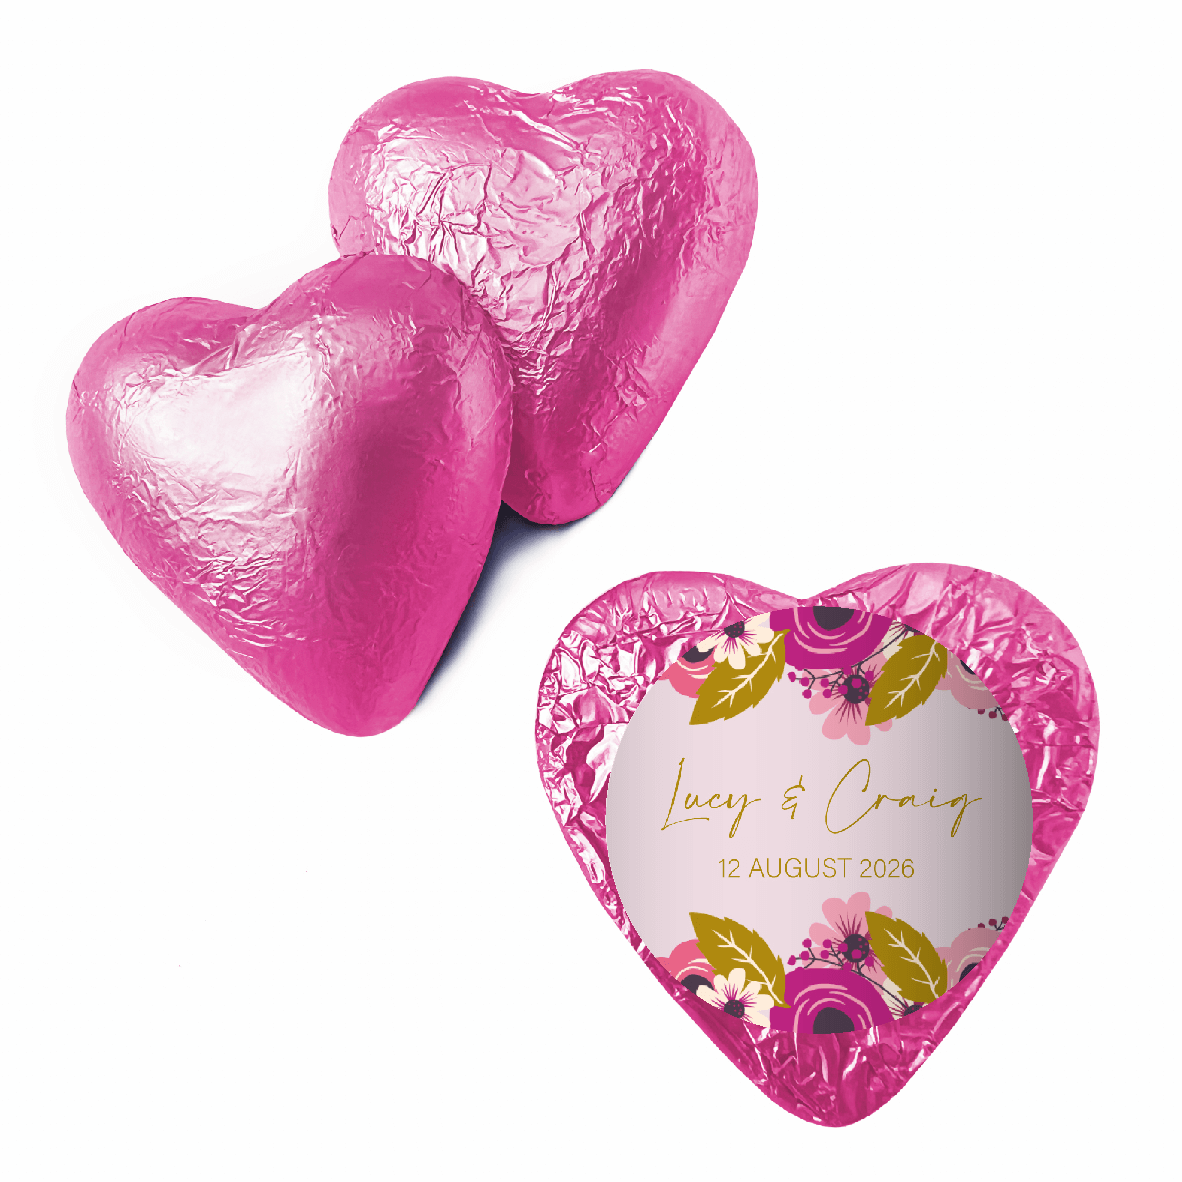 Mothers Day Chocolate Hearts